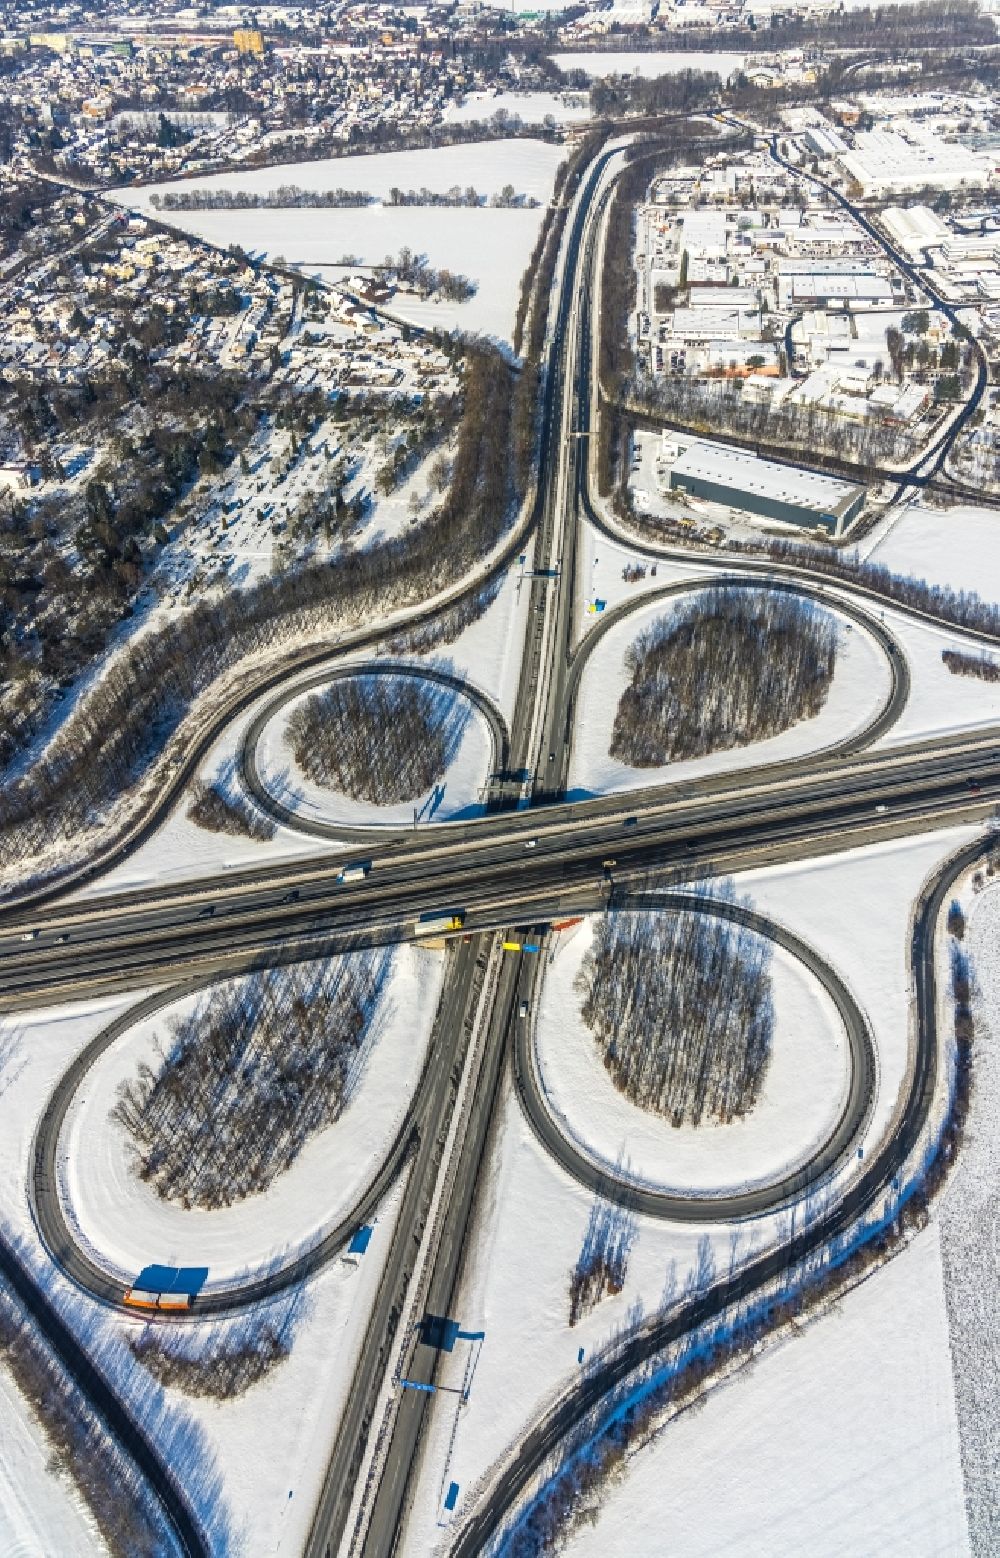 Unna from the bird's eye view: Wintry snowy traffic flow at the intersection- motorway A4 , A1 Kreuz Dortmund/Unna in form of cloverleaf in Unna in the state North Rhine-Westphalia, Germany